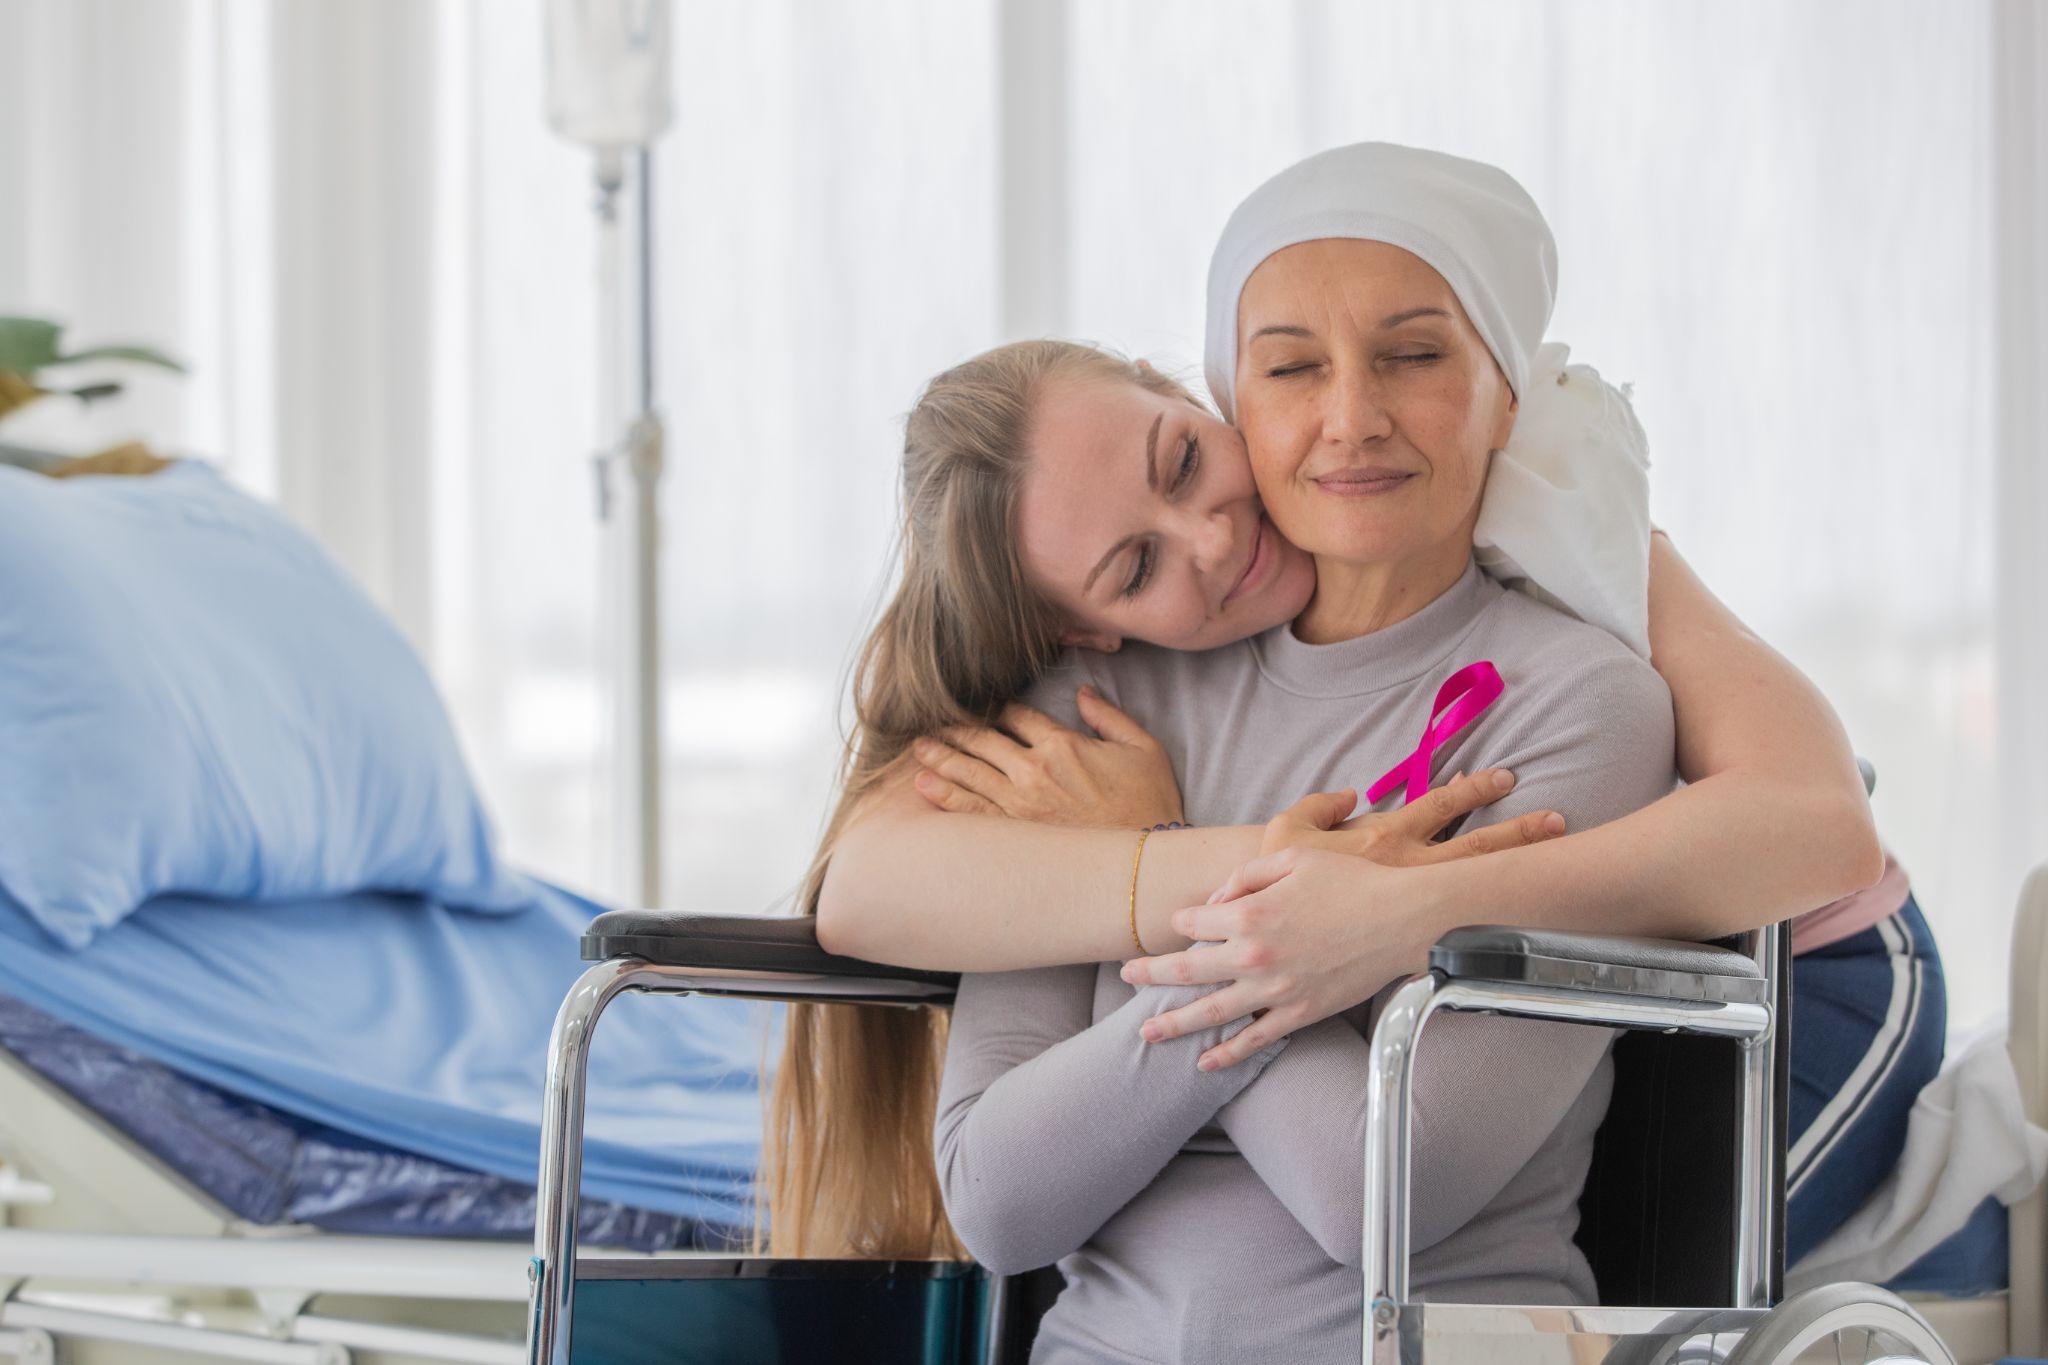 A woman hugging a cancer patient who is wearing a pink cancer ribbon